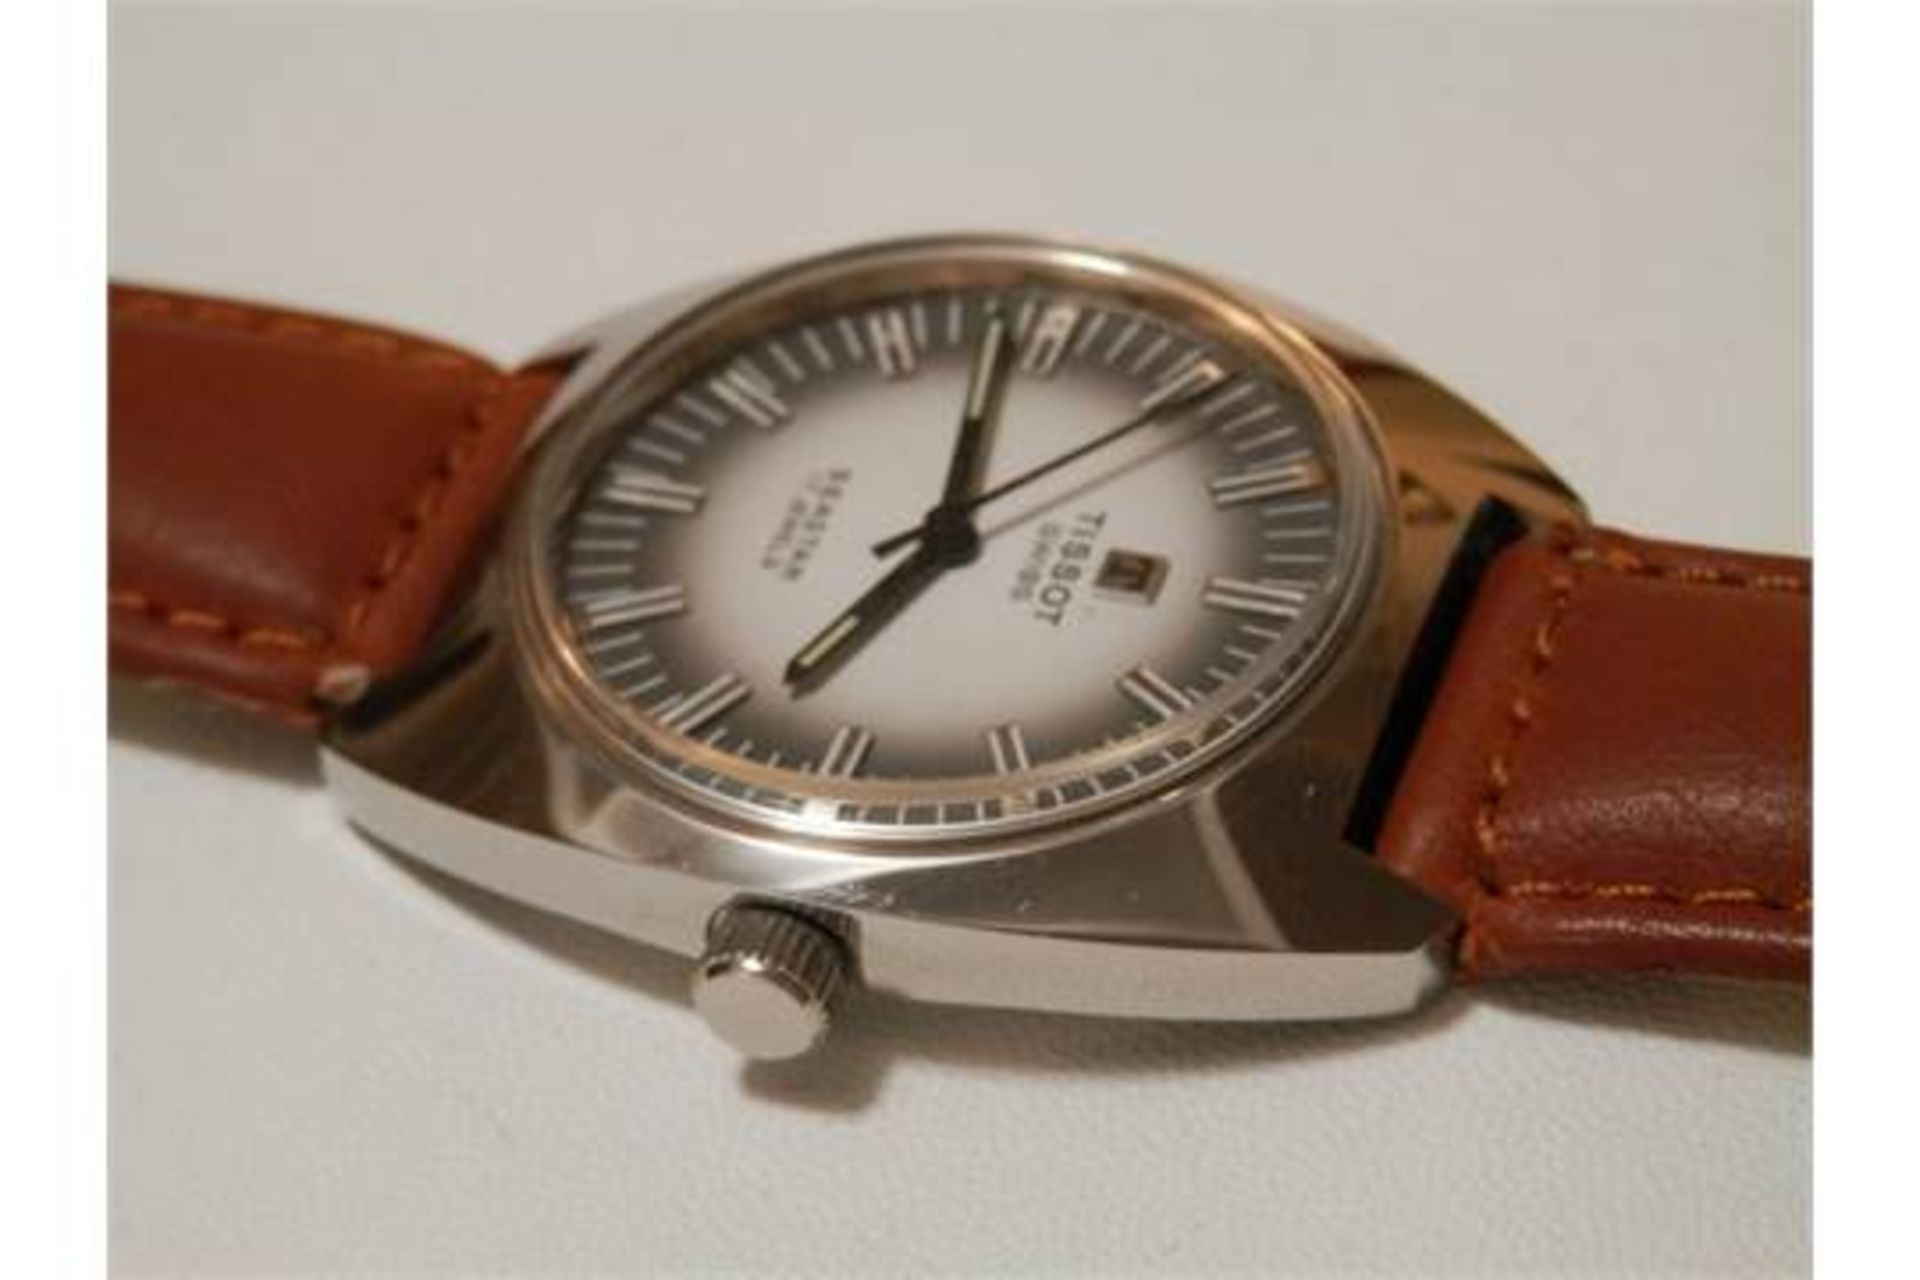 SUPERB GENTS TISSOT SEASTAR, POSSIBLY NEW/OLD STOCK 1970S 17 JEWEL SWISS WATCH (#2 of 3 available) - Image 9 of 10